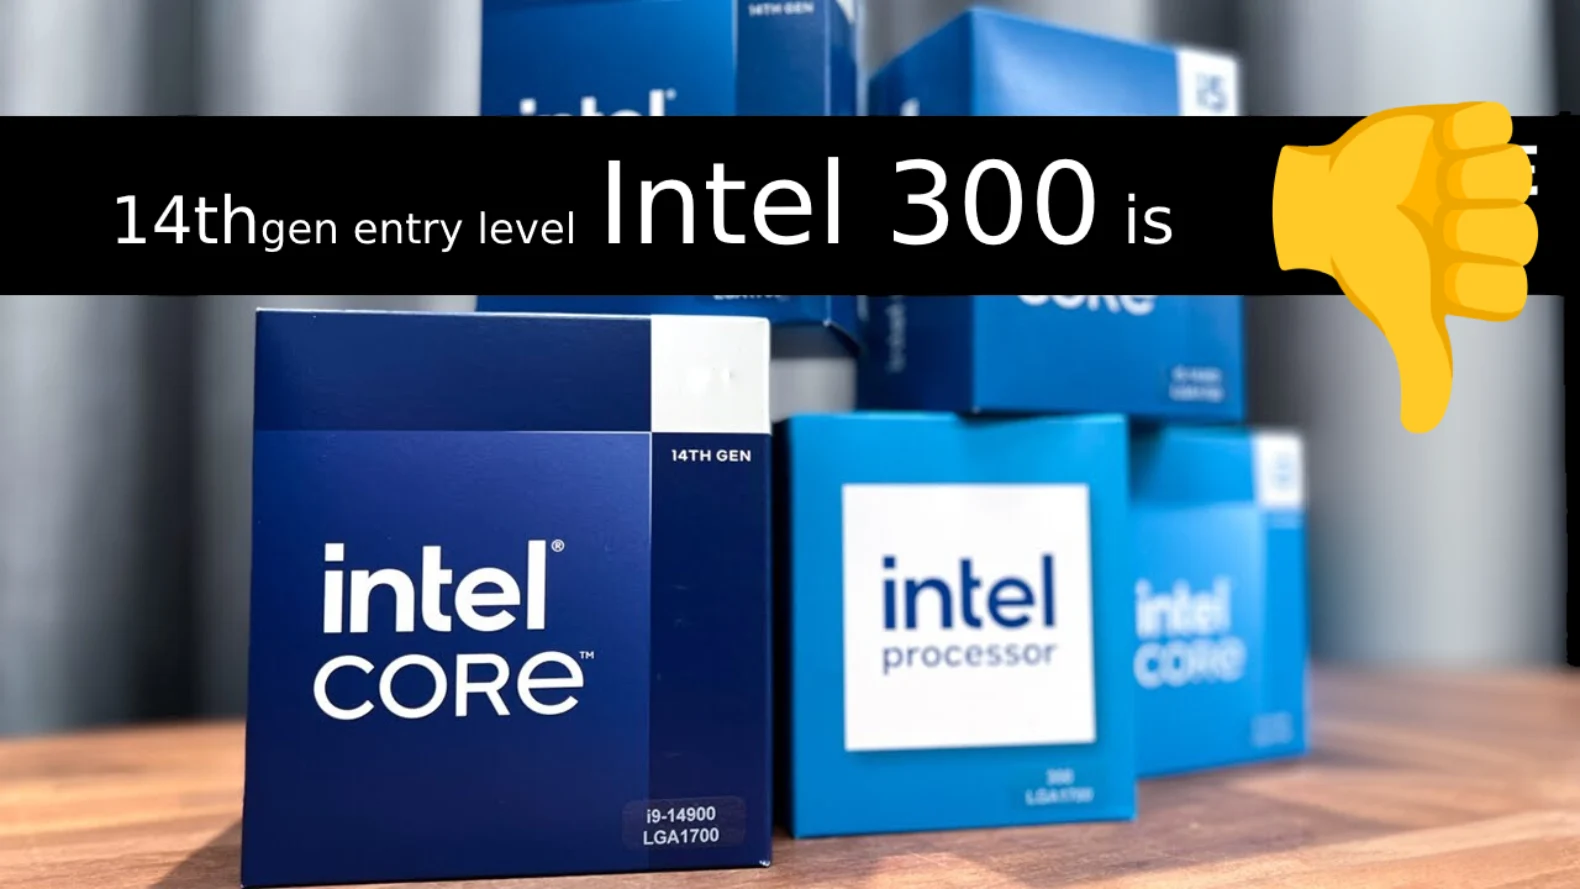 Entry level 14th gen Intel 300 revealed by Japanese Hardware Tests. Compared with Core i3-14100